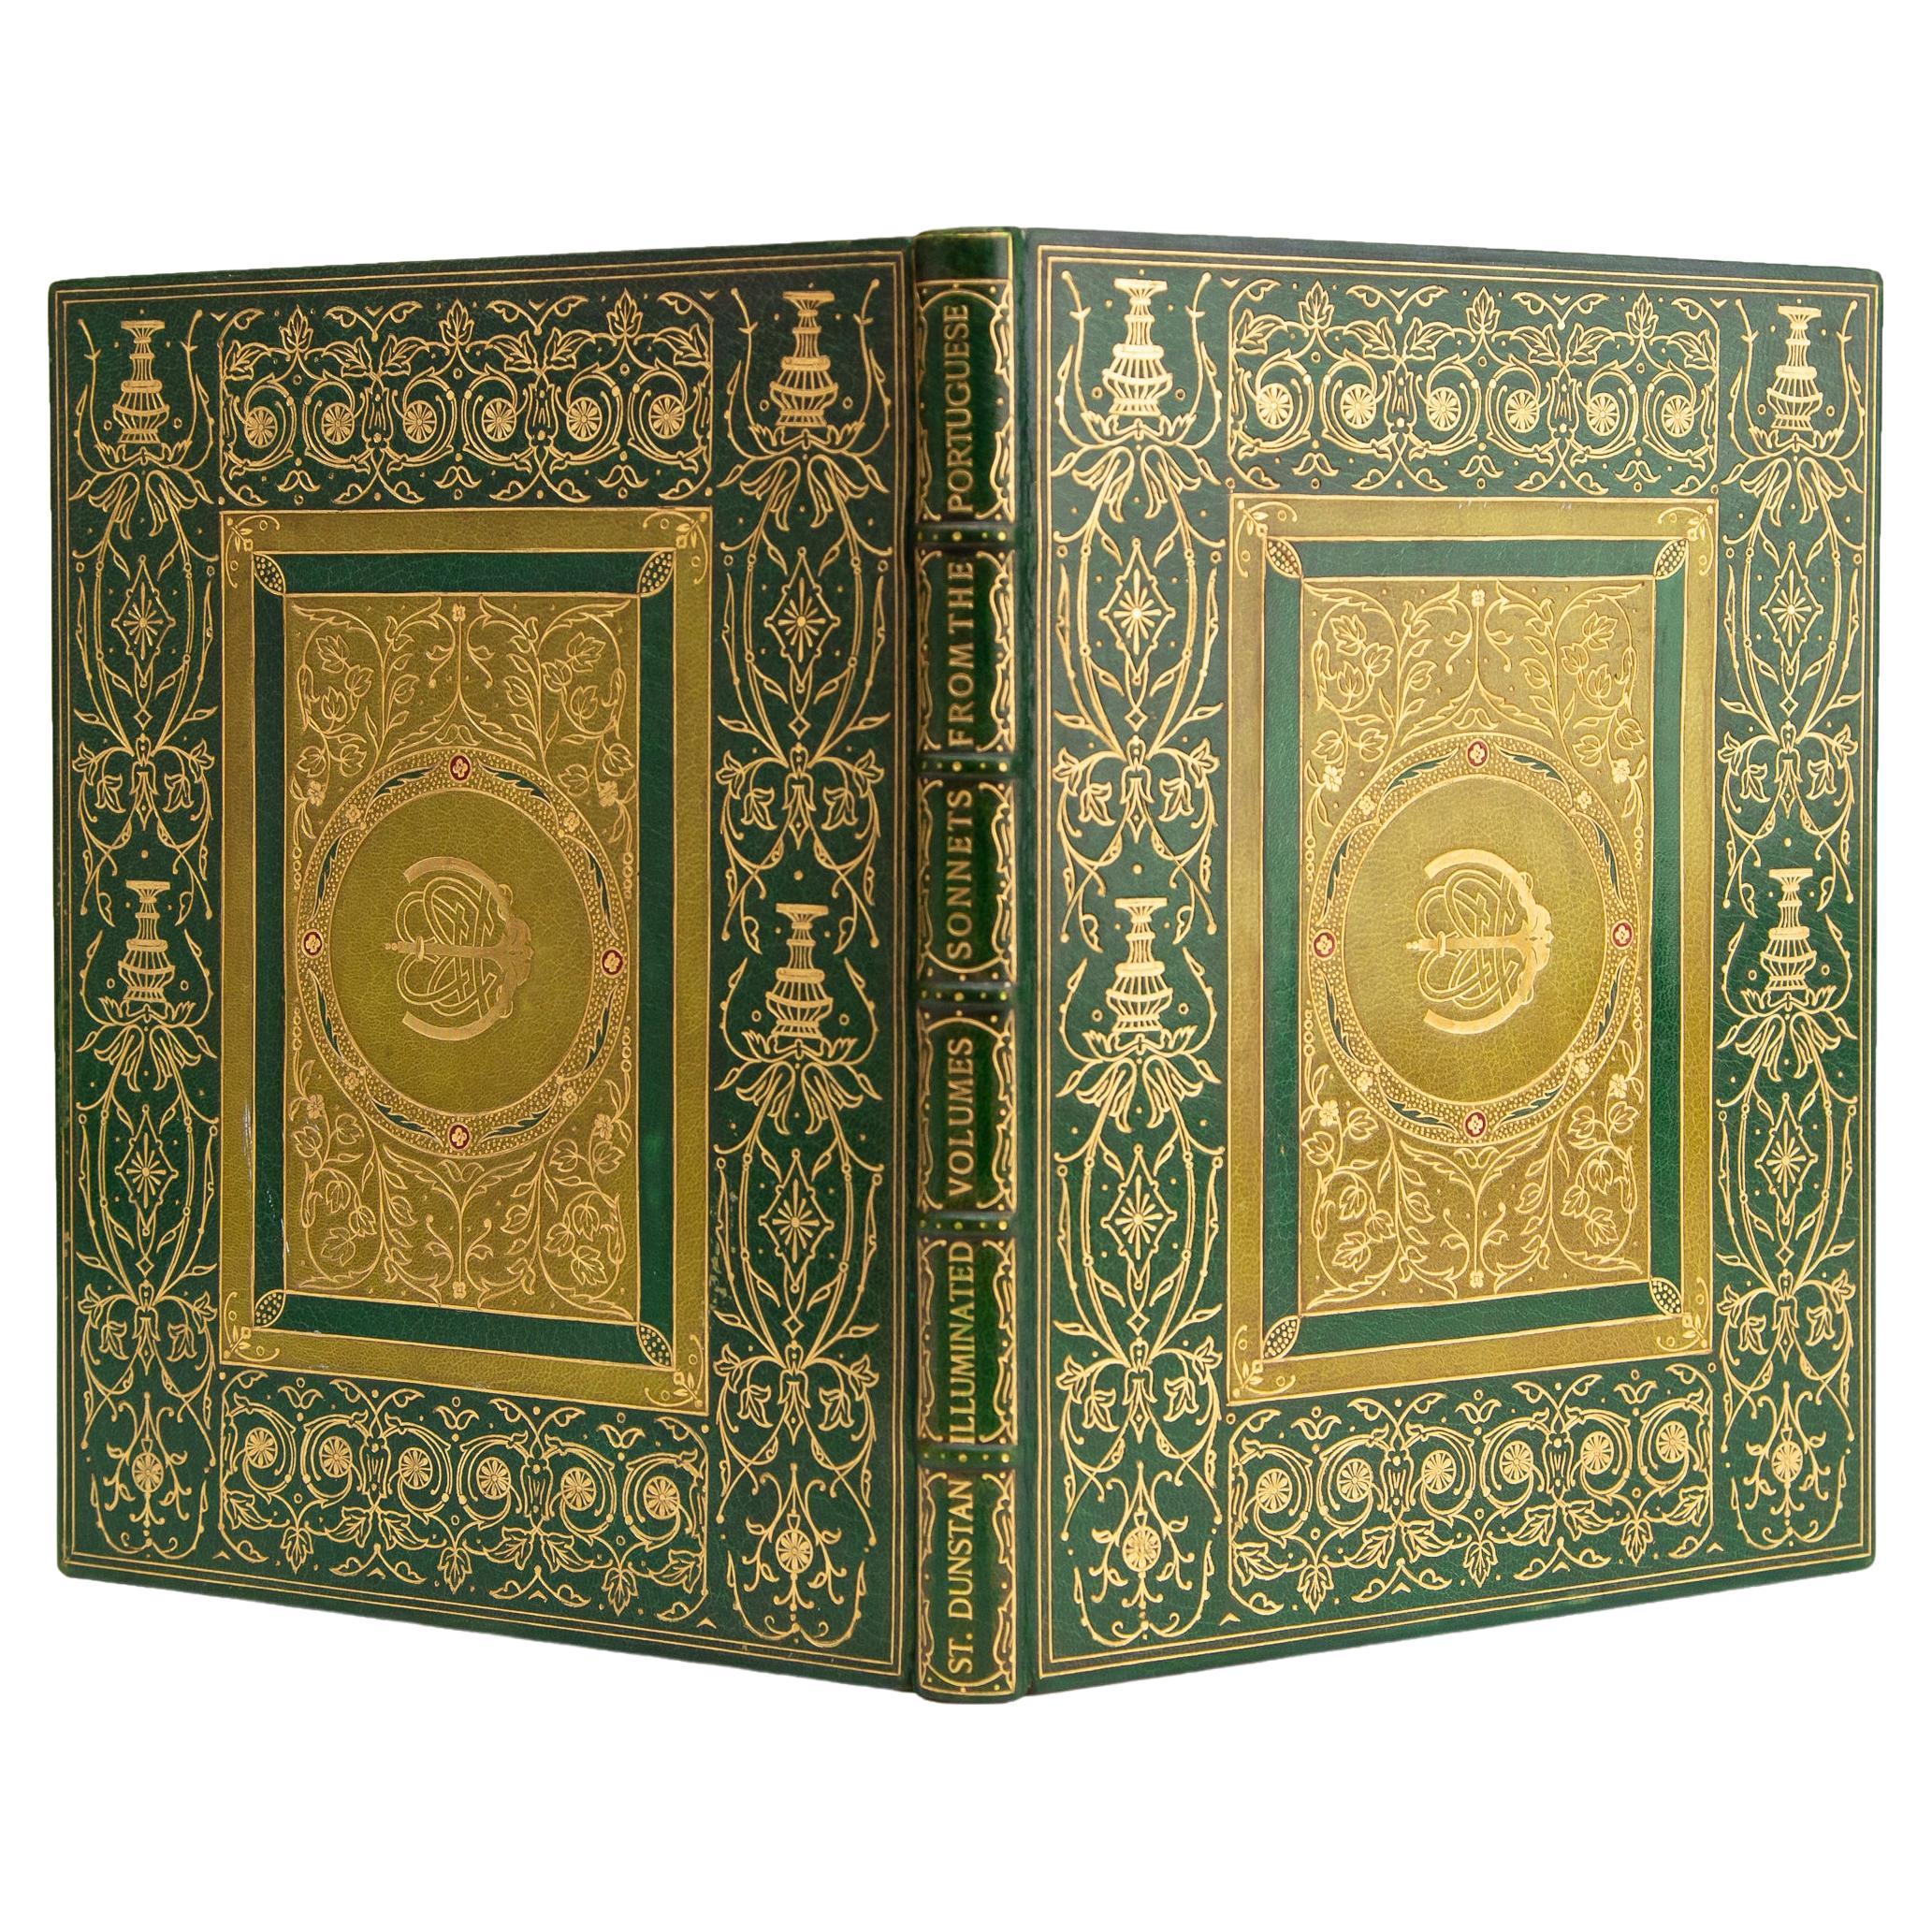 1 Volume. Elizabeth Barrett Browning, Sonnets from the Portuguese.